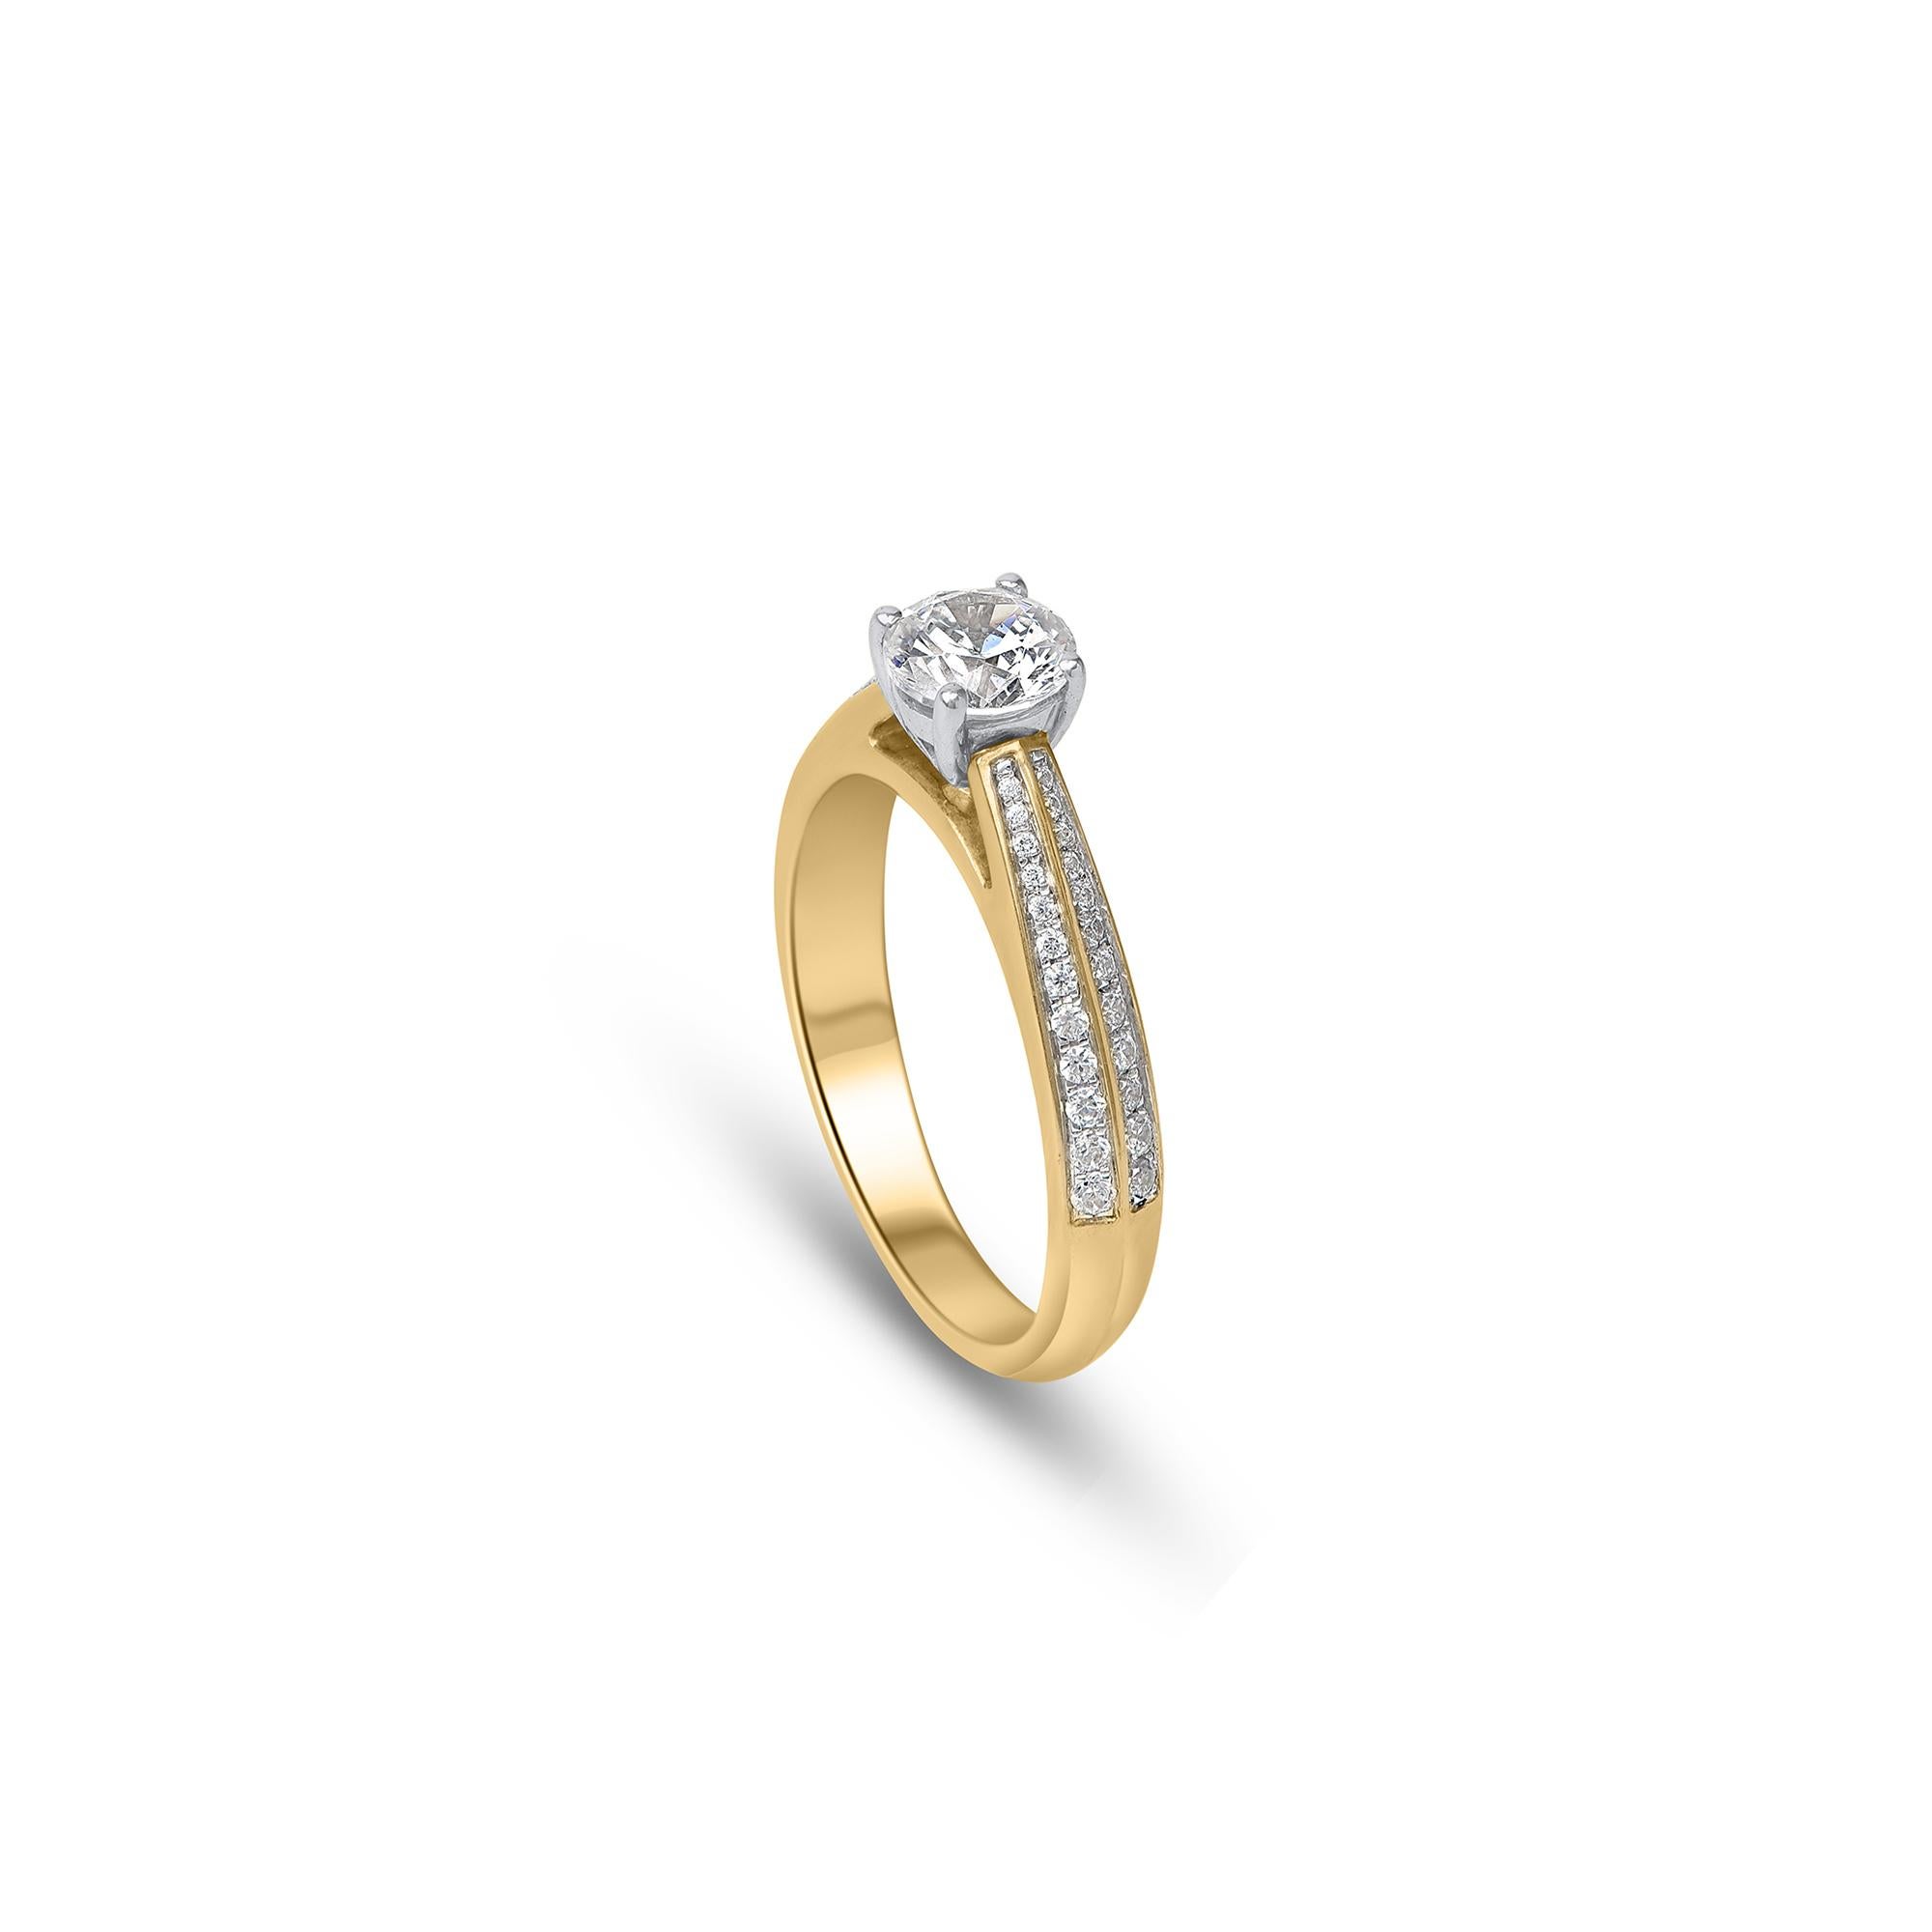 This dazzling design features 49 brilliant-cut diamonds beautifully set in prong and pave setting - crafted expertly in 18 kt yellow gold. Diamonds are graded H-I Color, I1 Clarity. 

Metal color and ring size can be customized on request. 

This